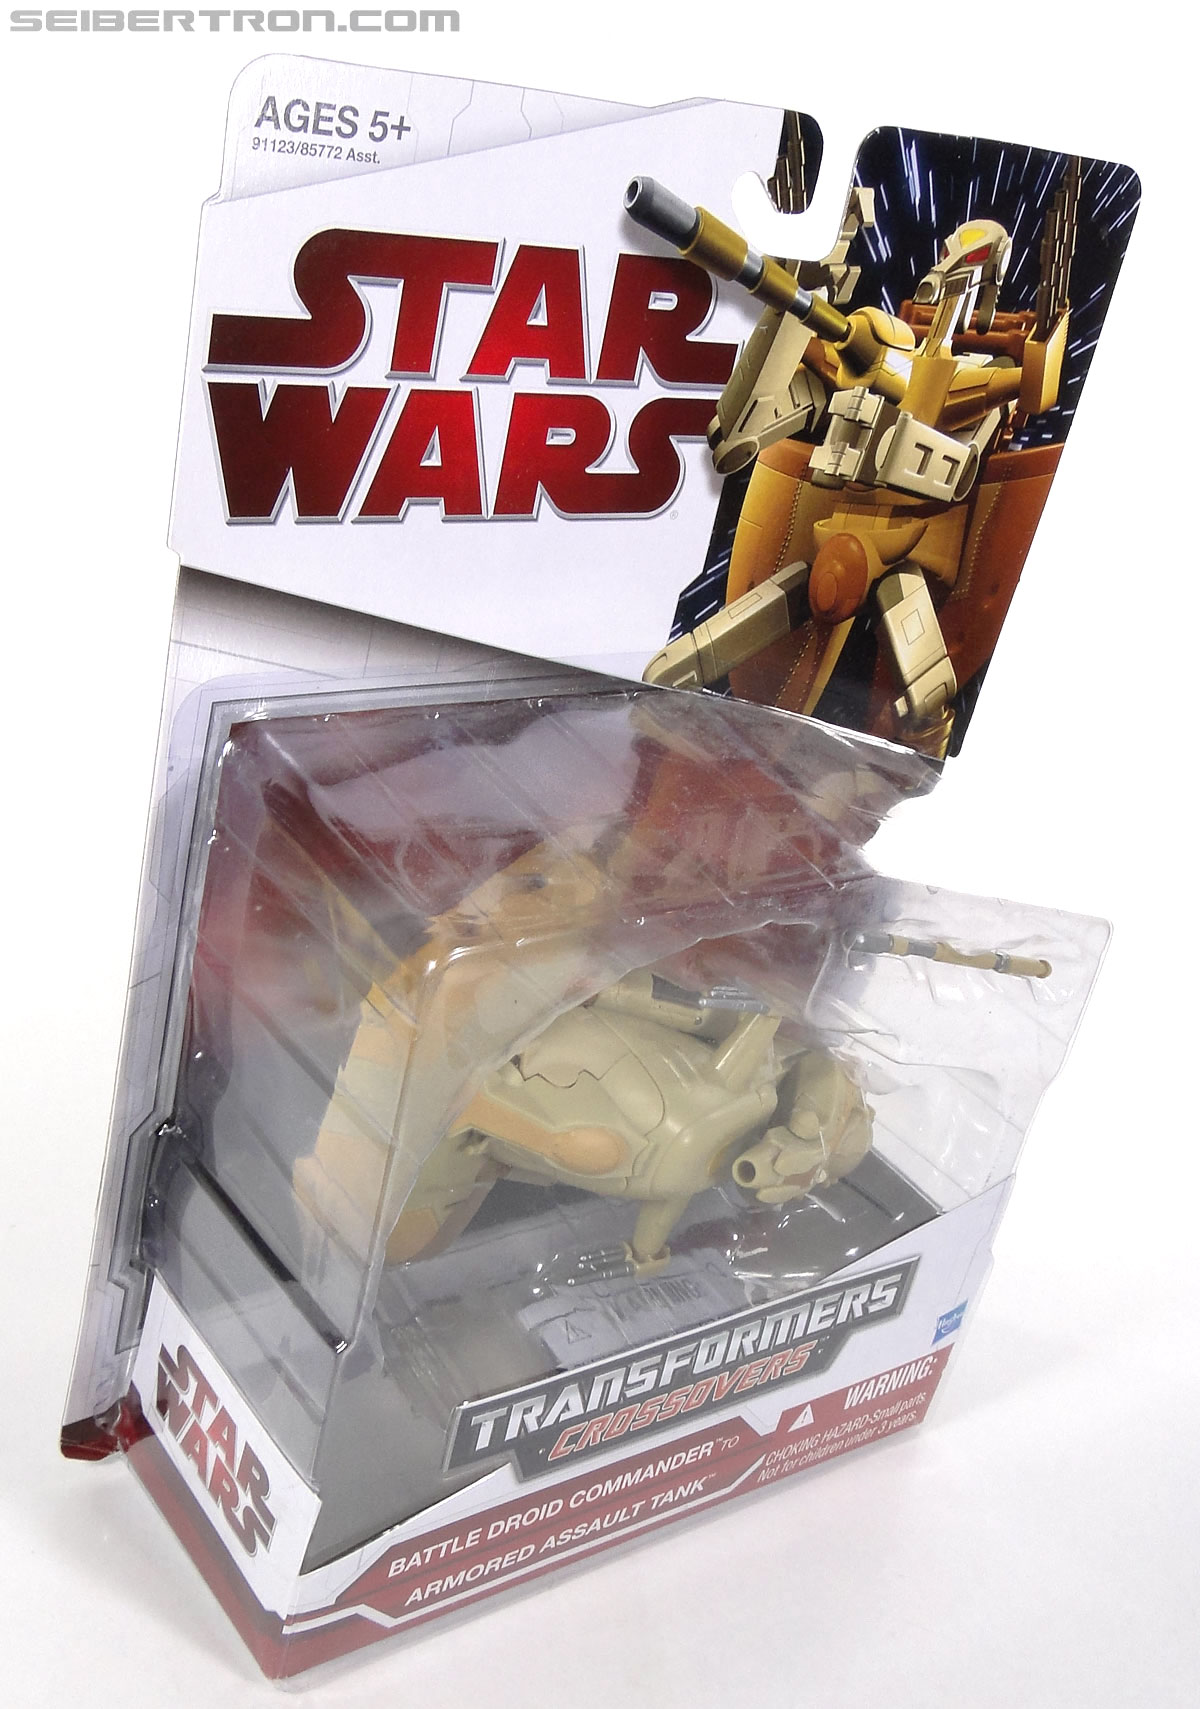 Star Wars Transformers Battle Droid Commader (Armored Assault Tank) (Battle Droid Commader) (Image #4 of 85)